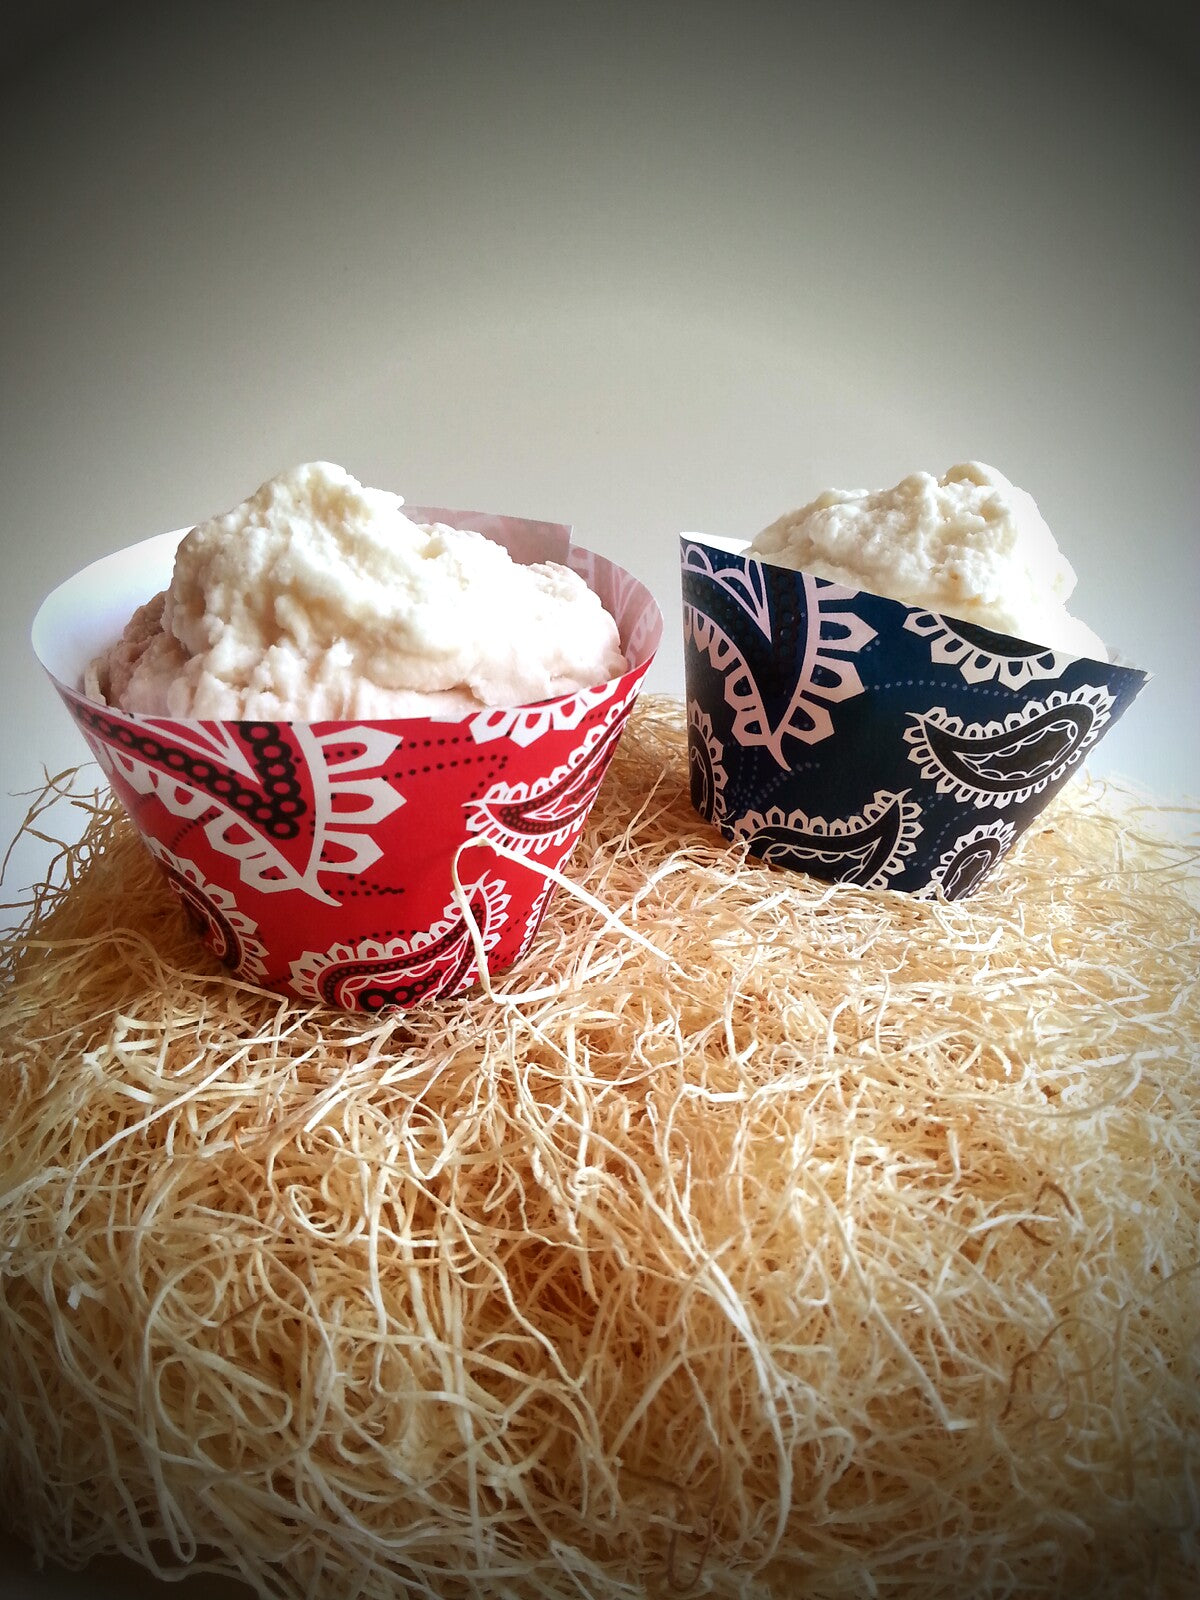 Two vanilla frosted cupcakes sit on a pile of hay. They have cupcake wrappers with flat tops resembling bandanna fabric. The left is red with black and white print, and the right is blue  with white and black print.